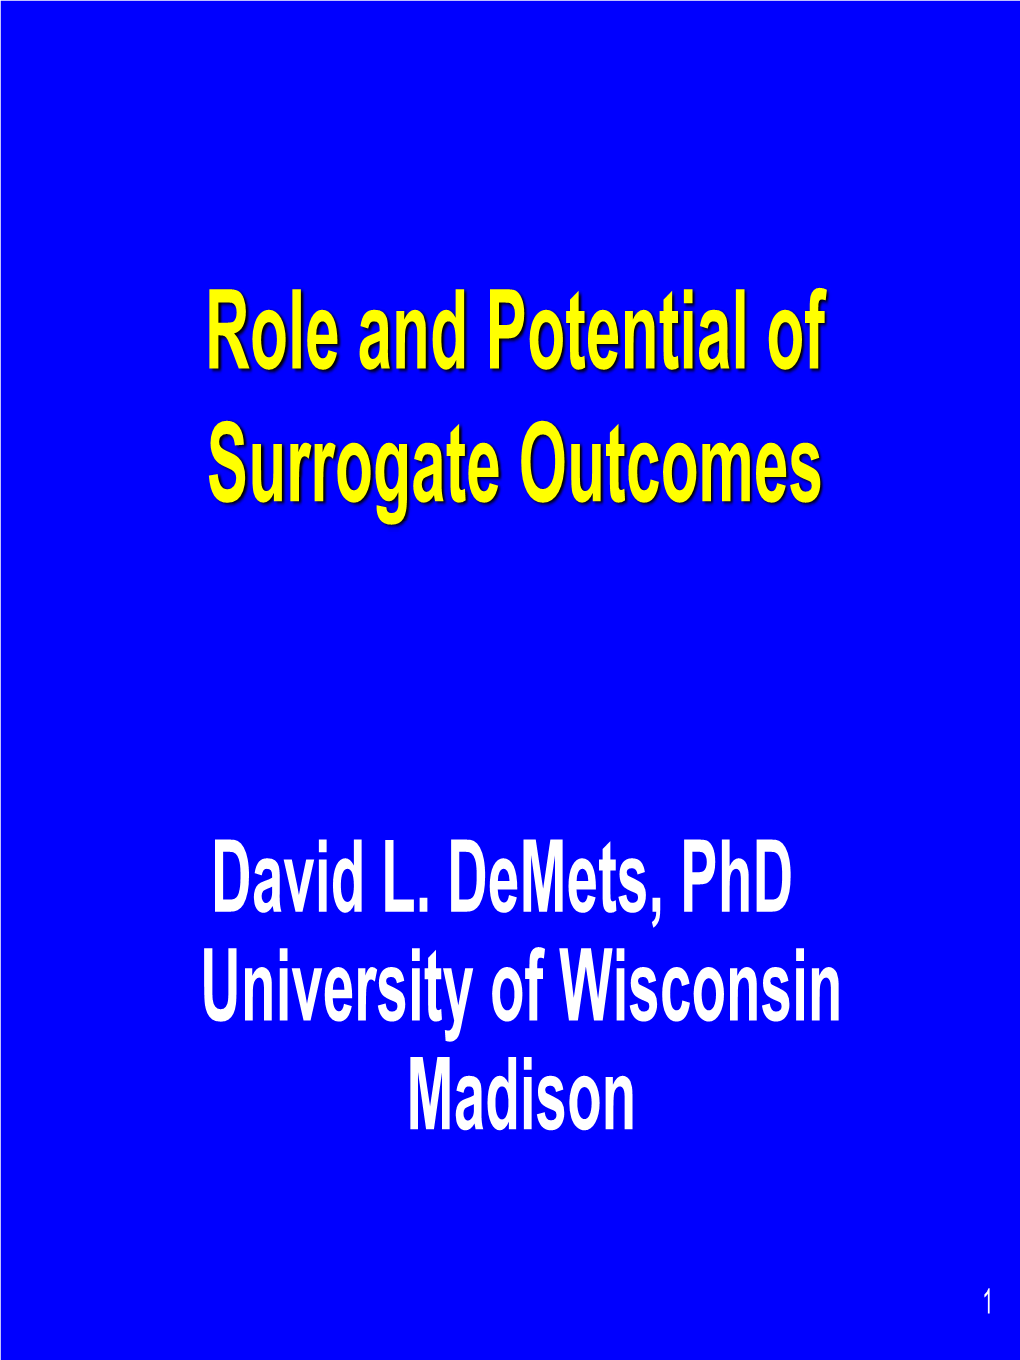 Role of Surrogates in Clinical Trials